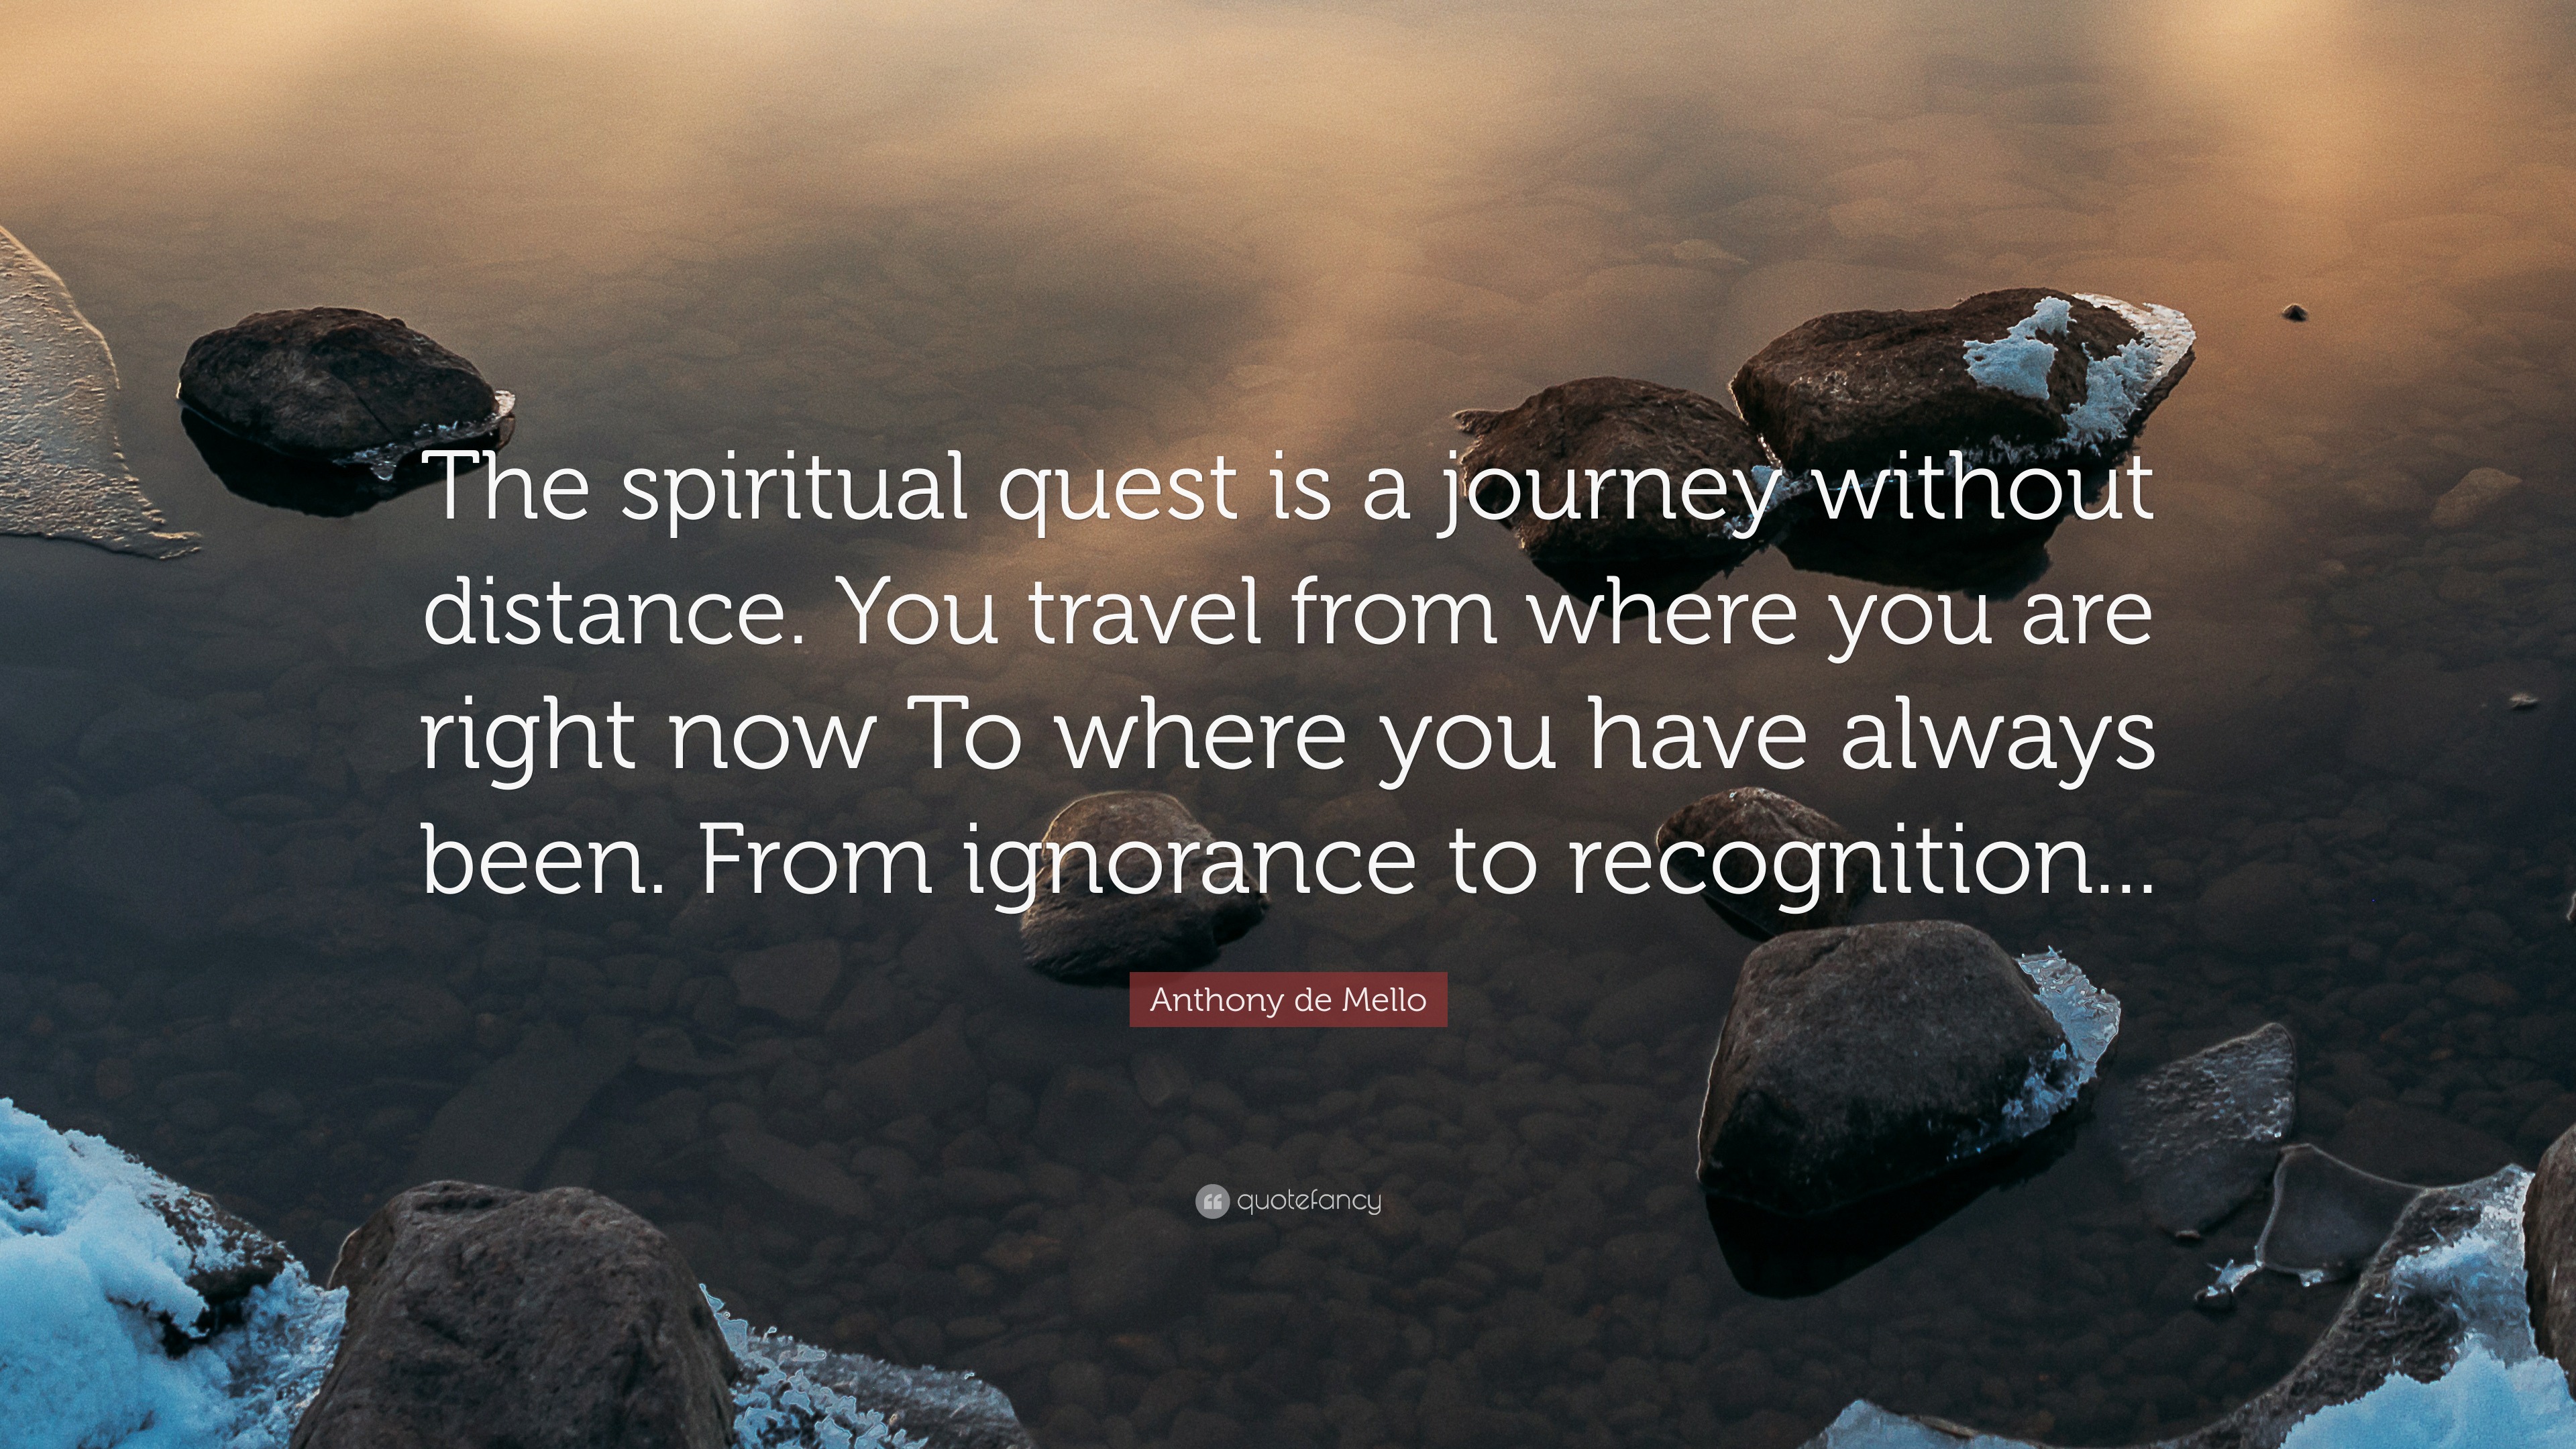 Anthony de Mello Quote: “The spiritual quest is a journey without ...